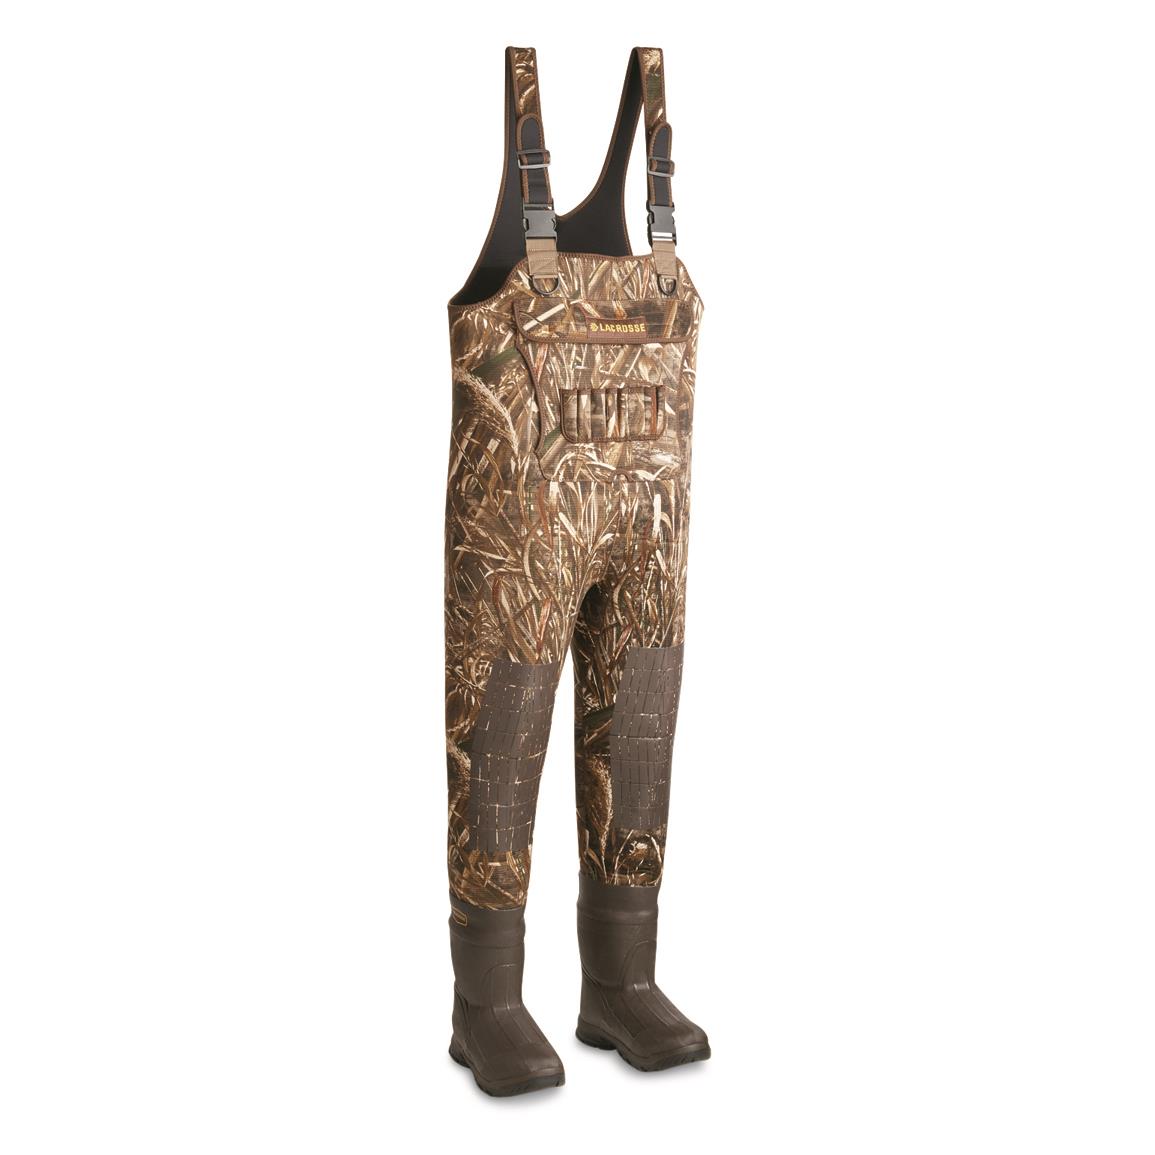 LaCrosse Brush Tuff Extreme Insulated Waders, 1,600 Gram, Realtree MAX-5®